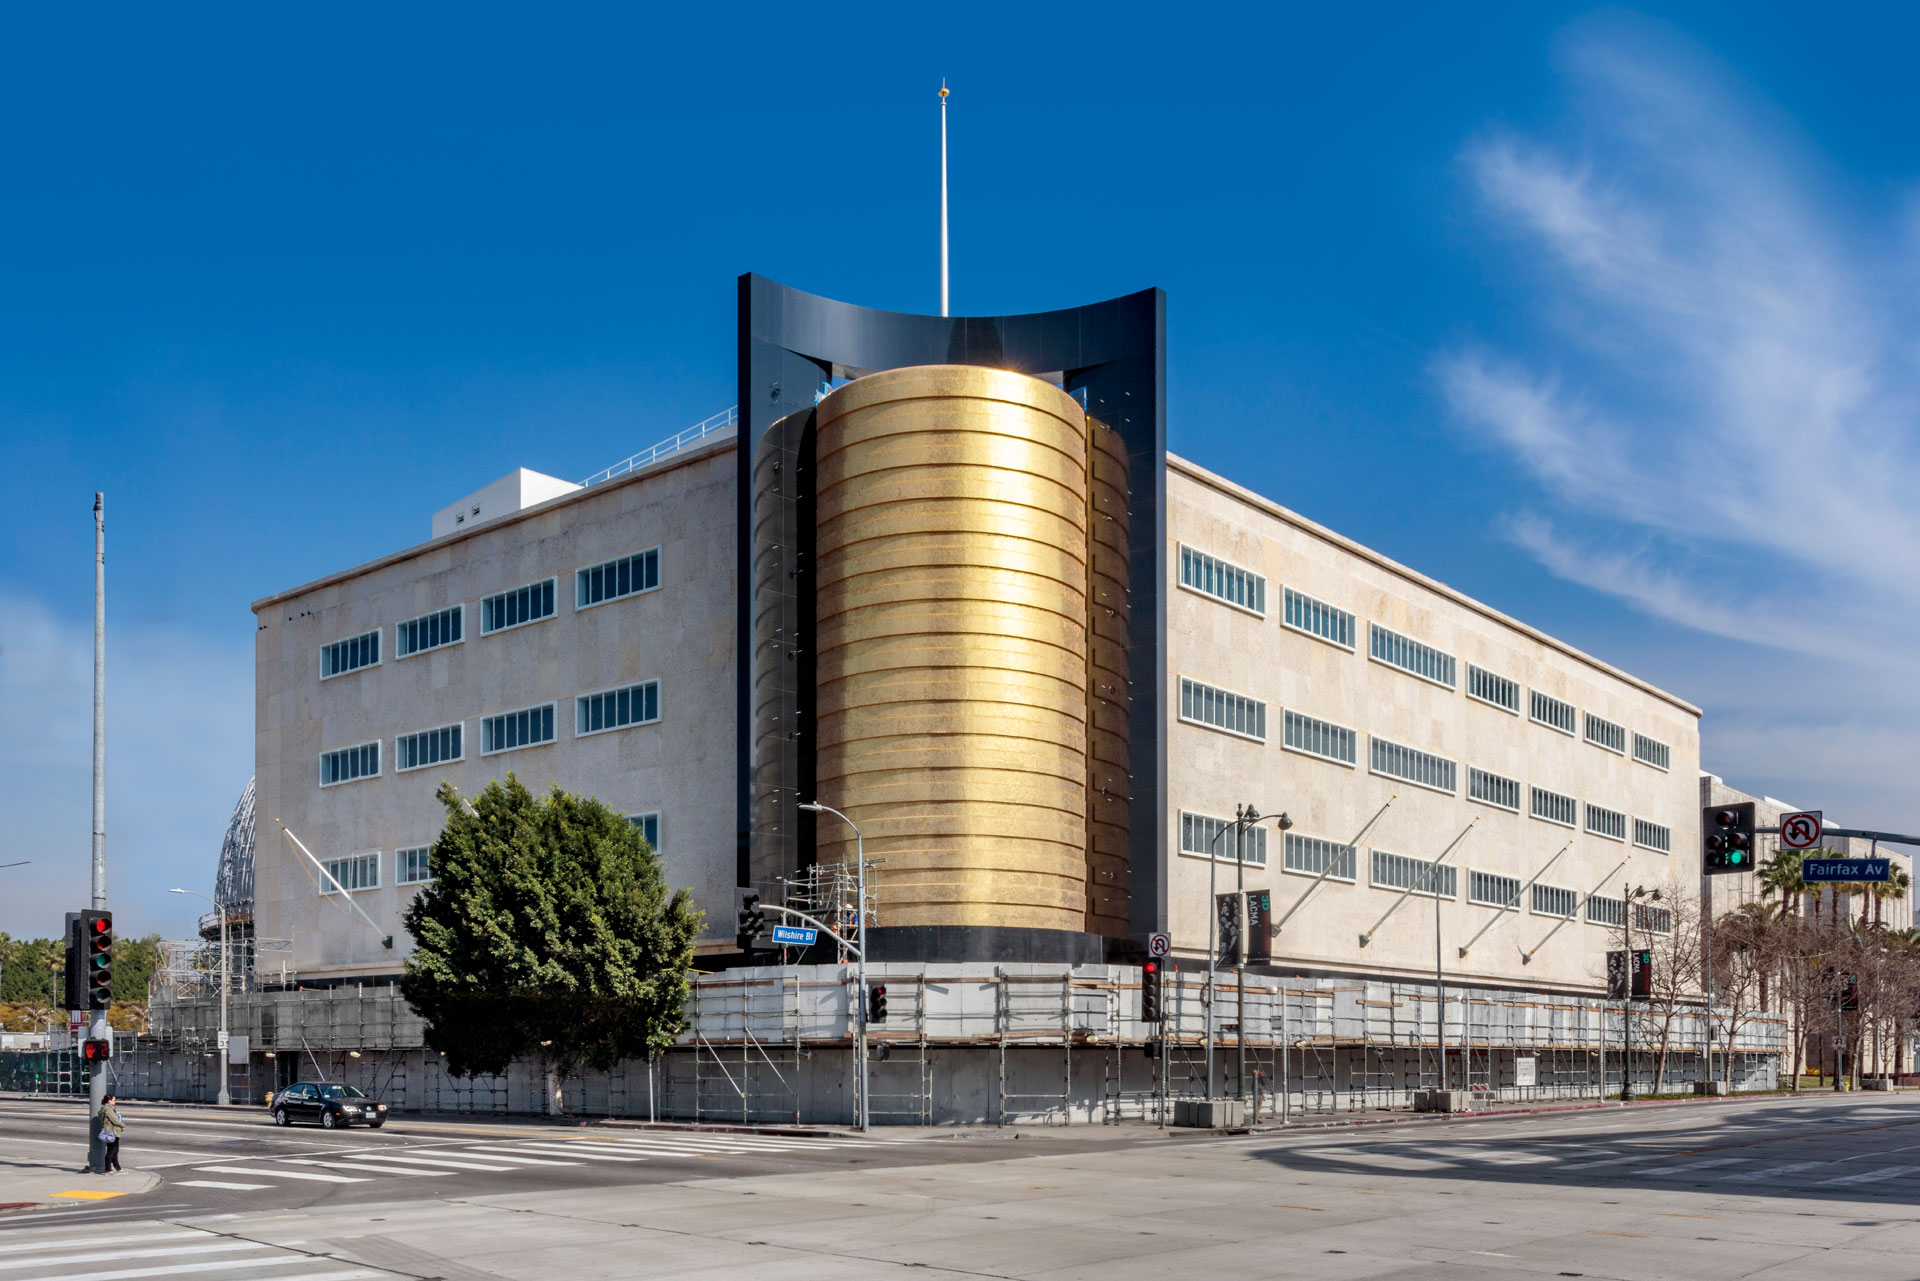 The new Academy Museum of Motion Pictures, designed by Renzo Piano, will open in LA in April 